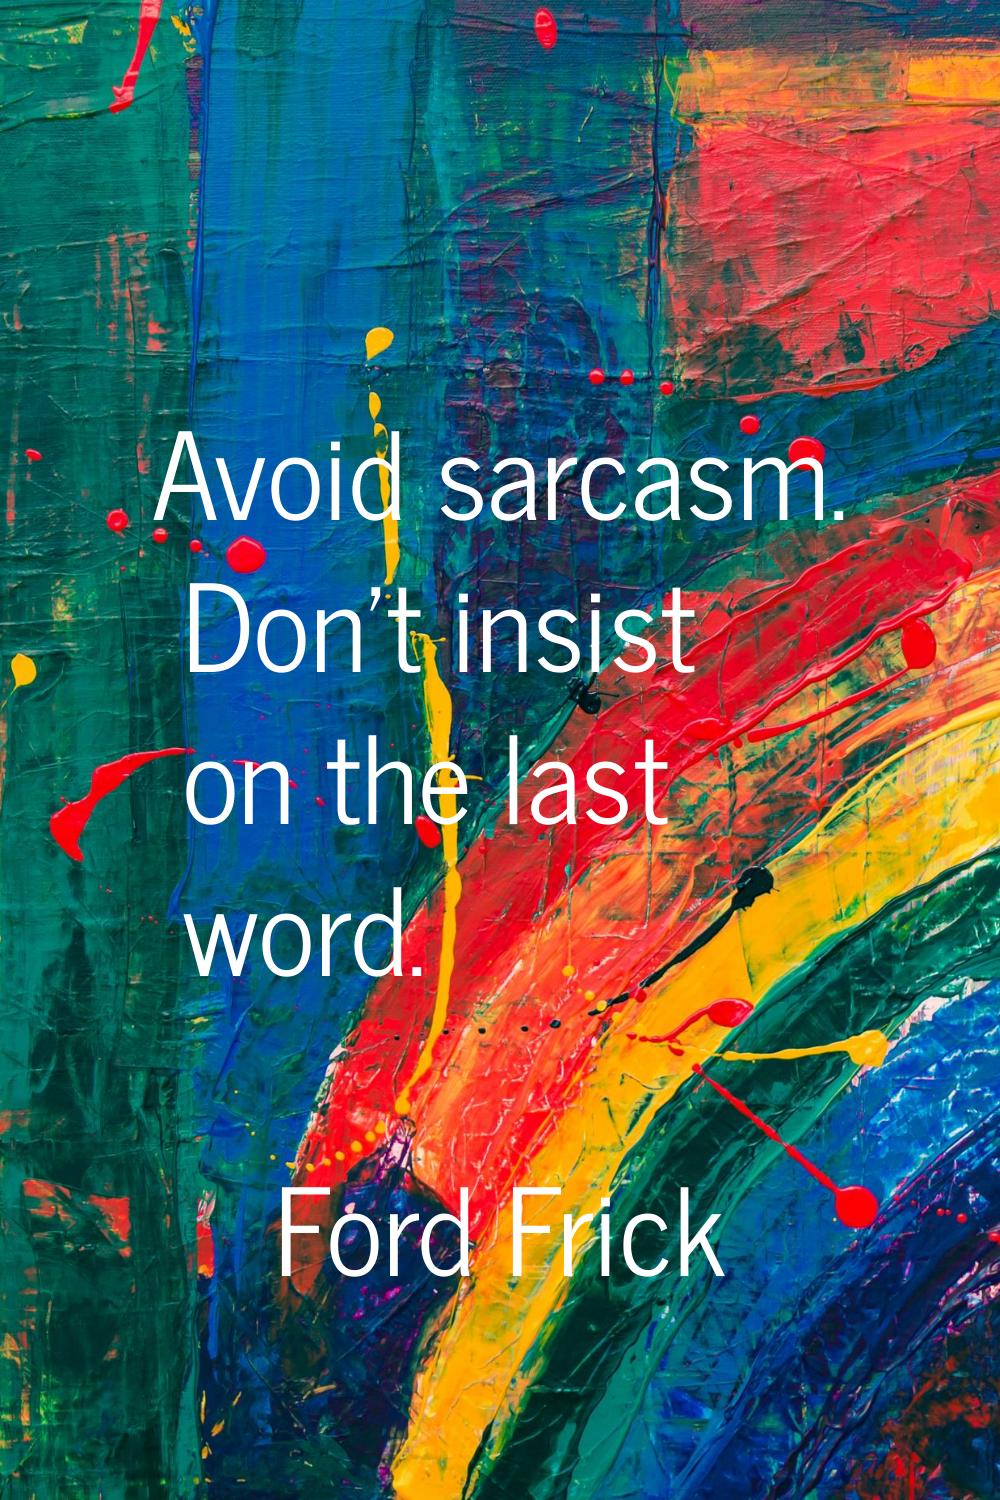 Avoid sarcasm. Don't insist on the last word.